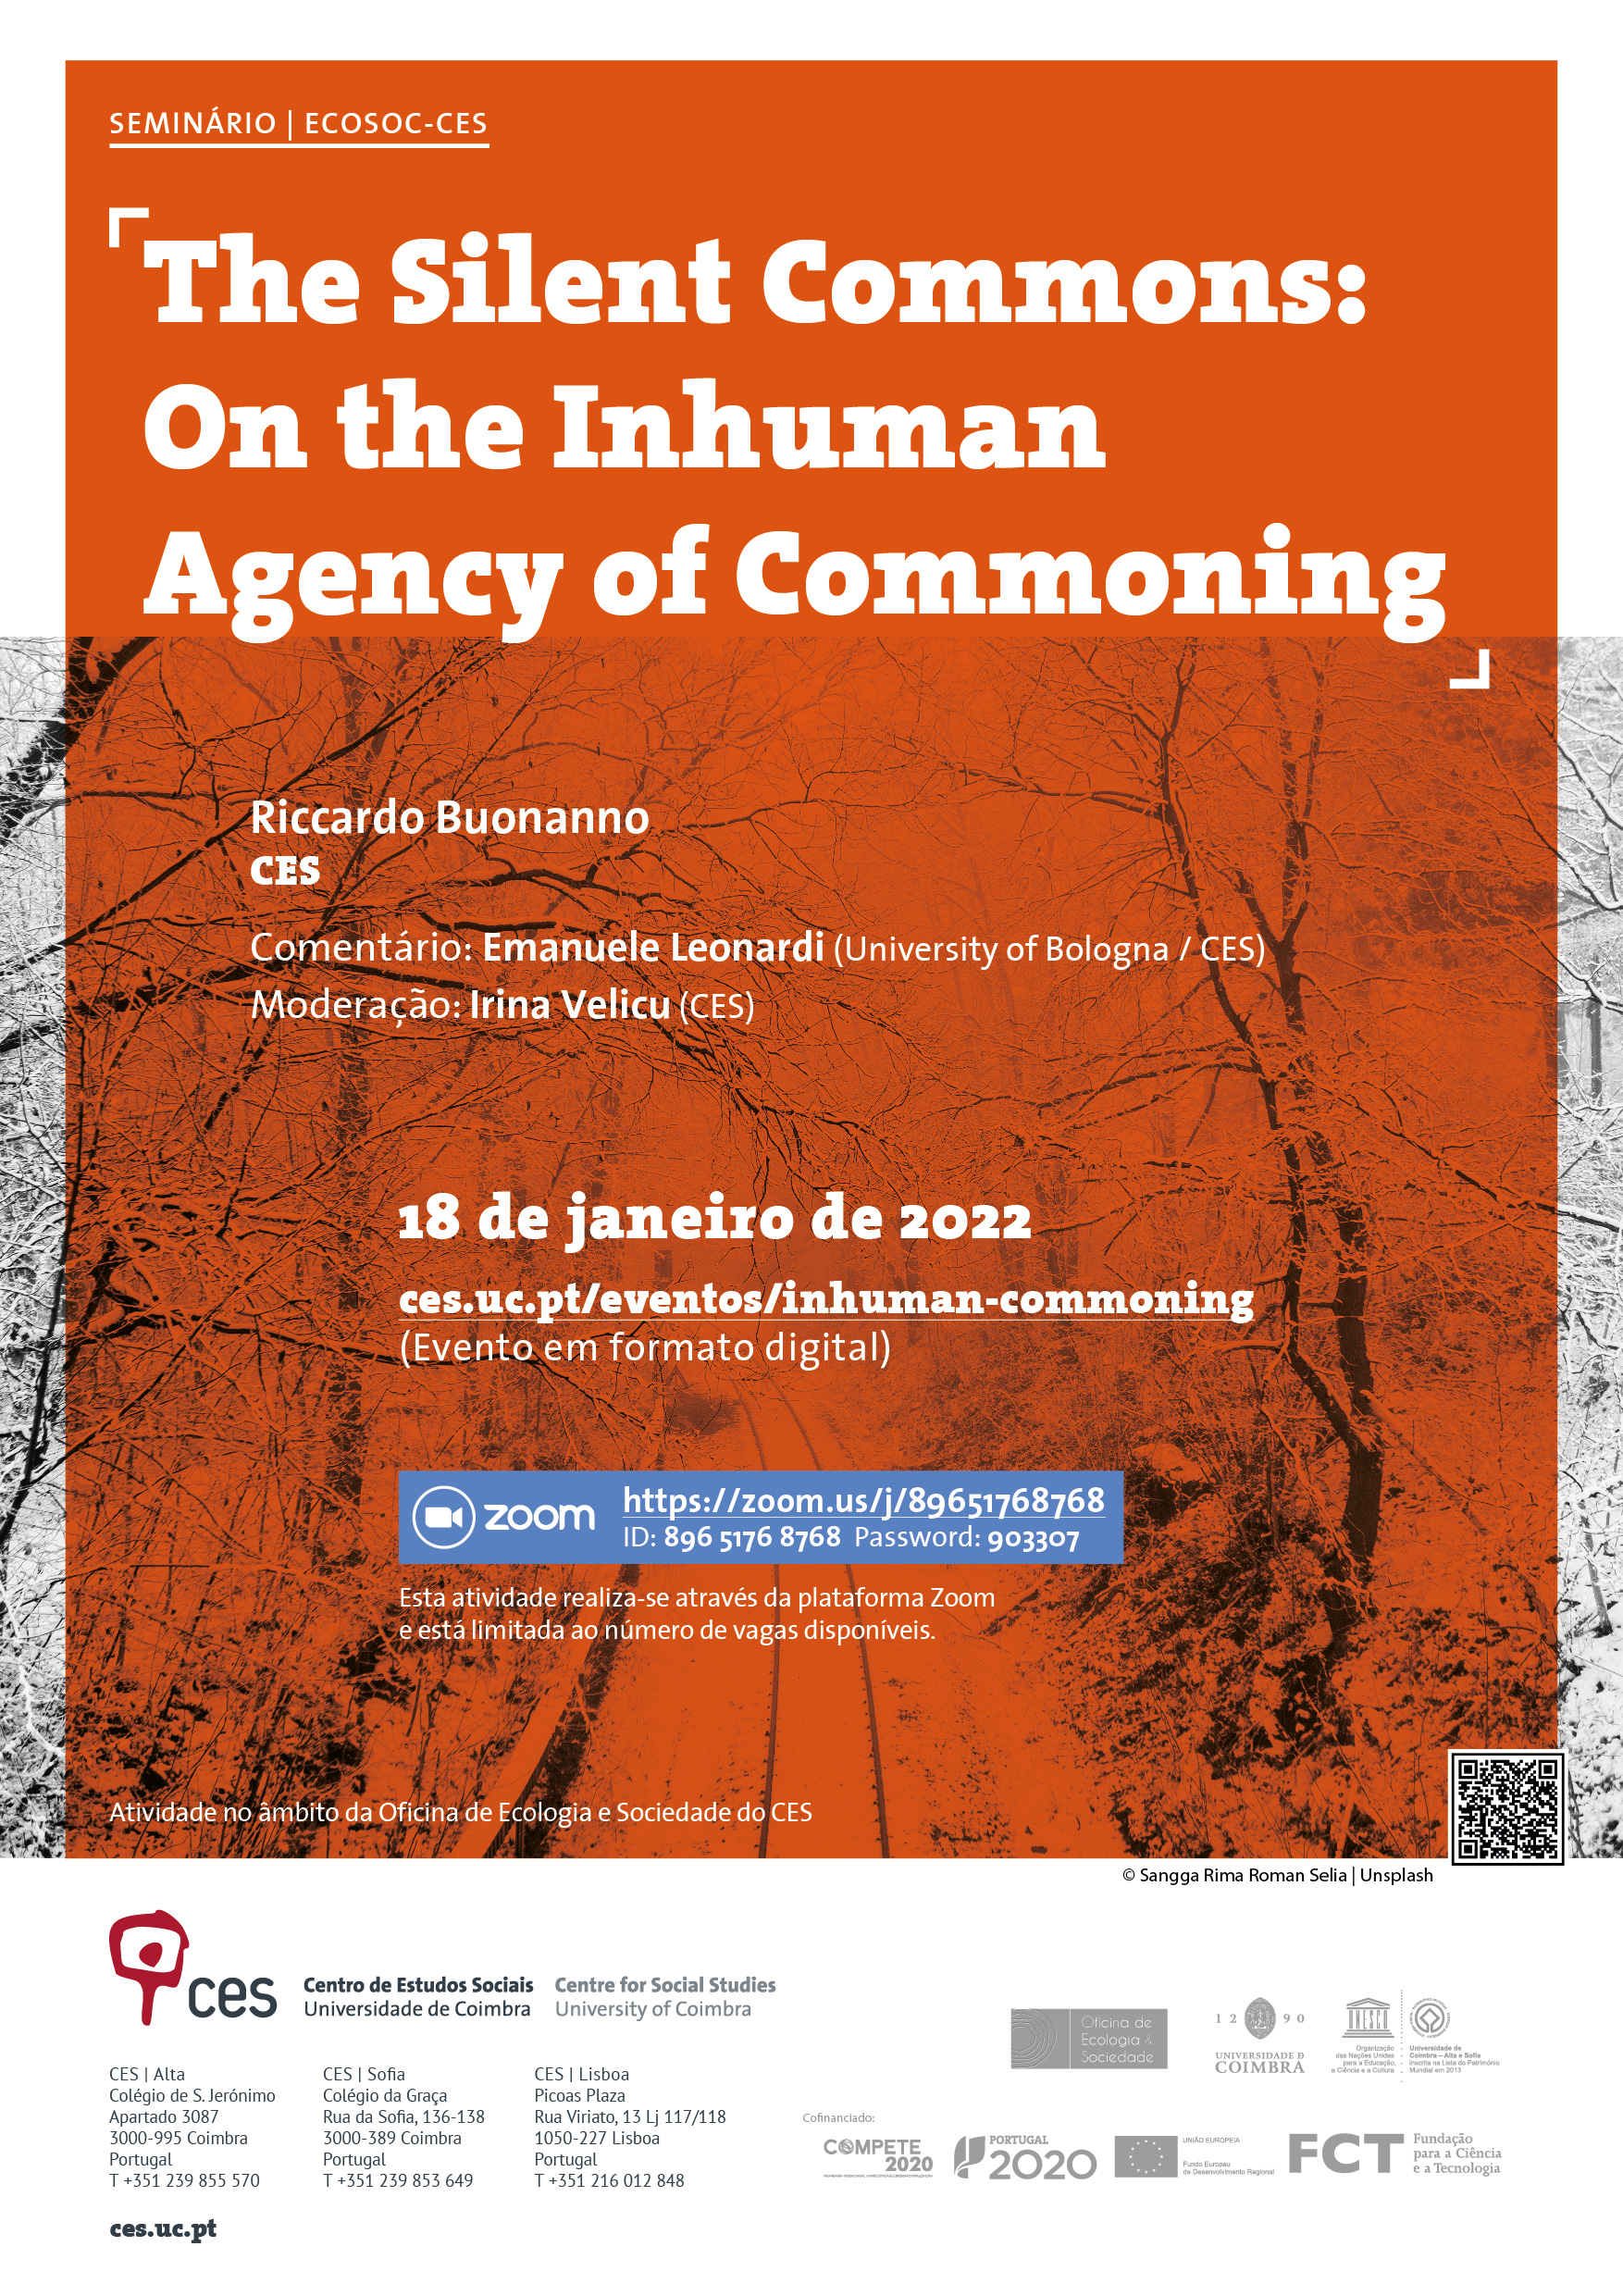 The Silent Commons: On the Inhuman Agency of Commoning<span id="edit_36133"><script>$(function() { $('#edit_36133').load( "/myces/user/editobj.php?tipo=evento&id=36133" ); });</script></span>